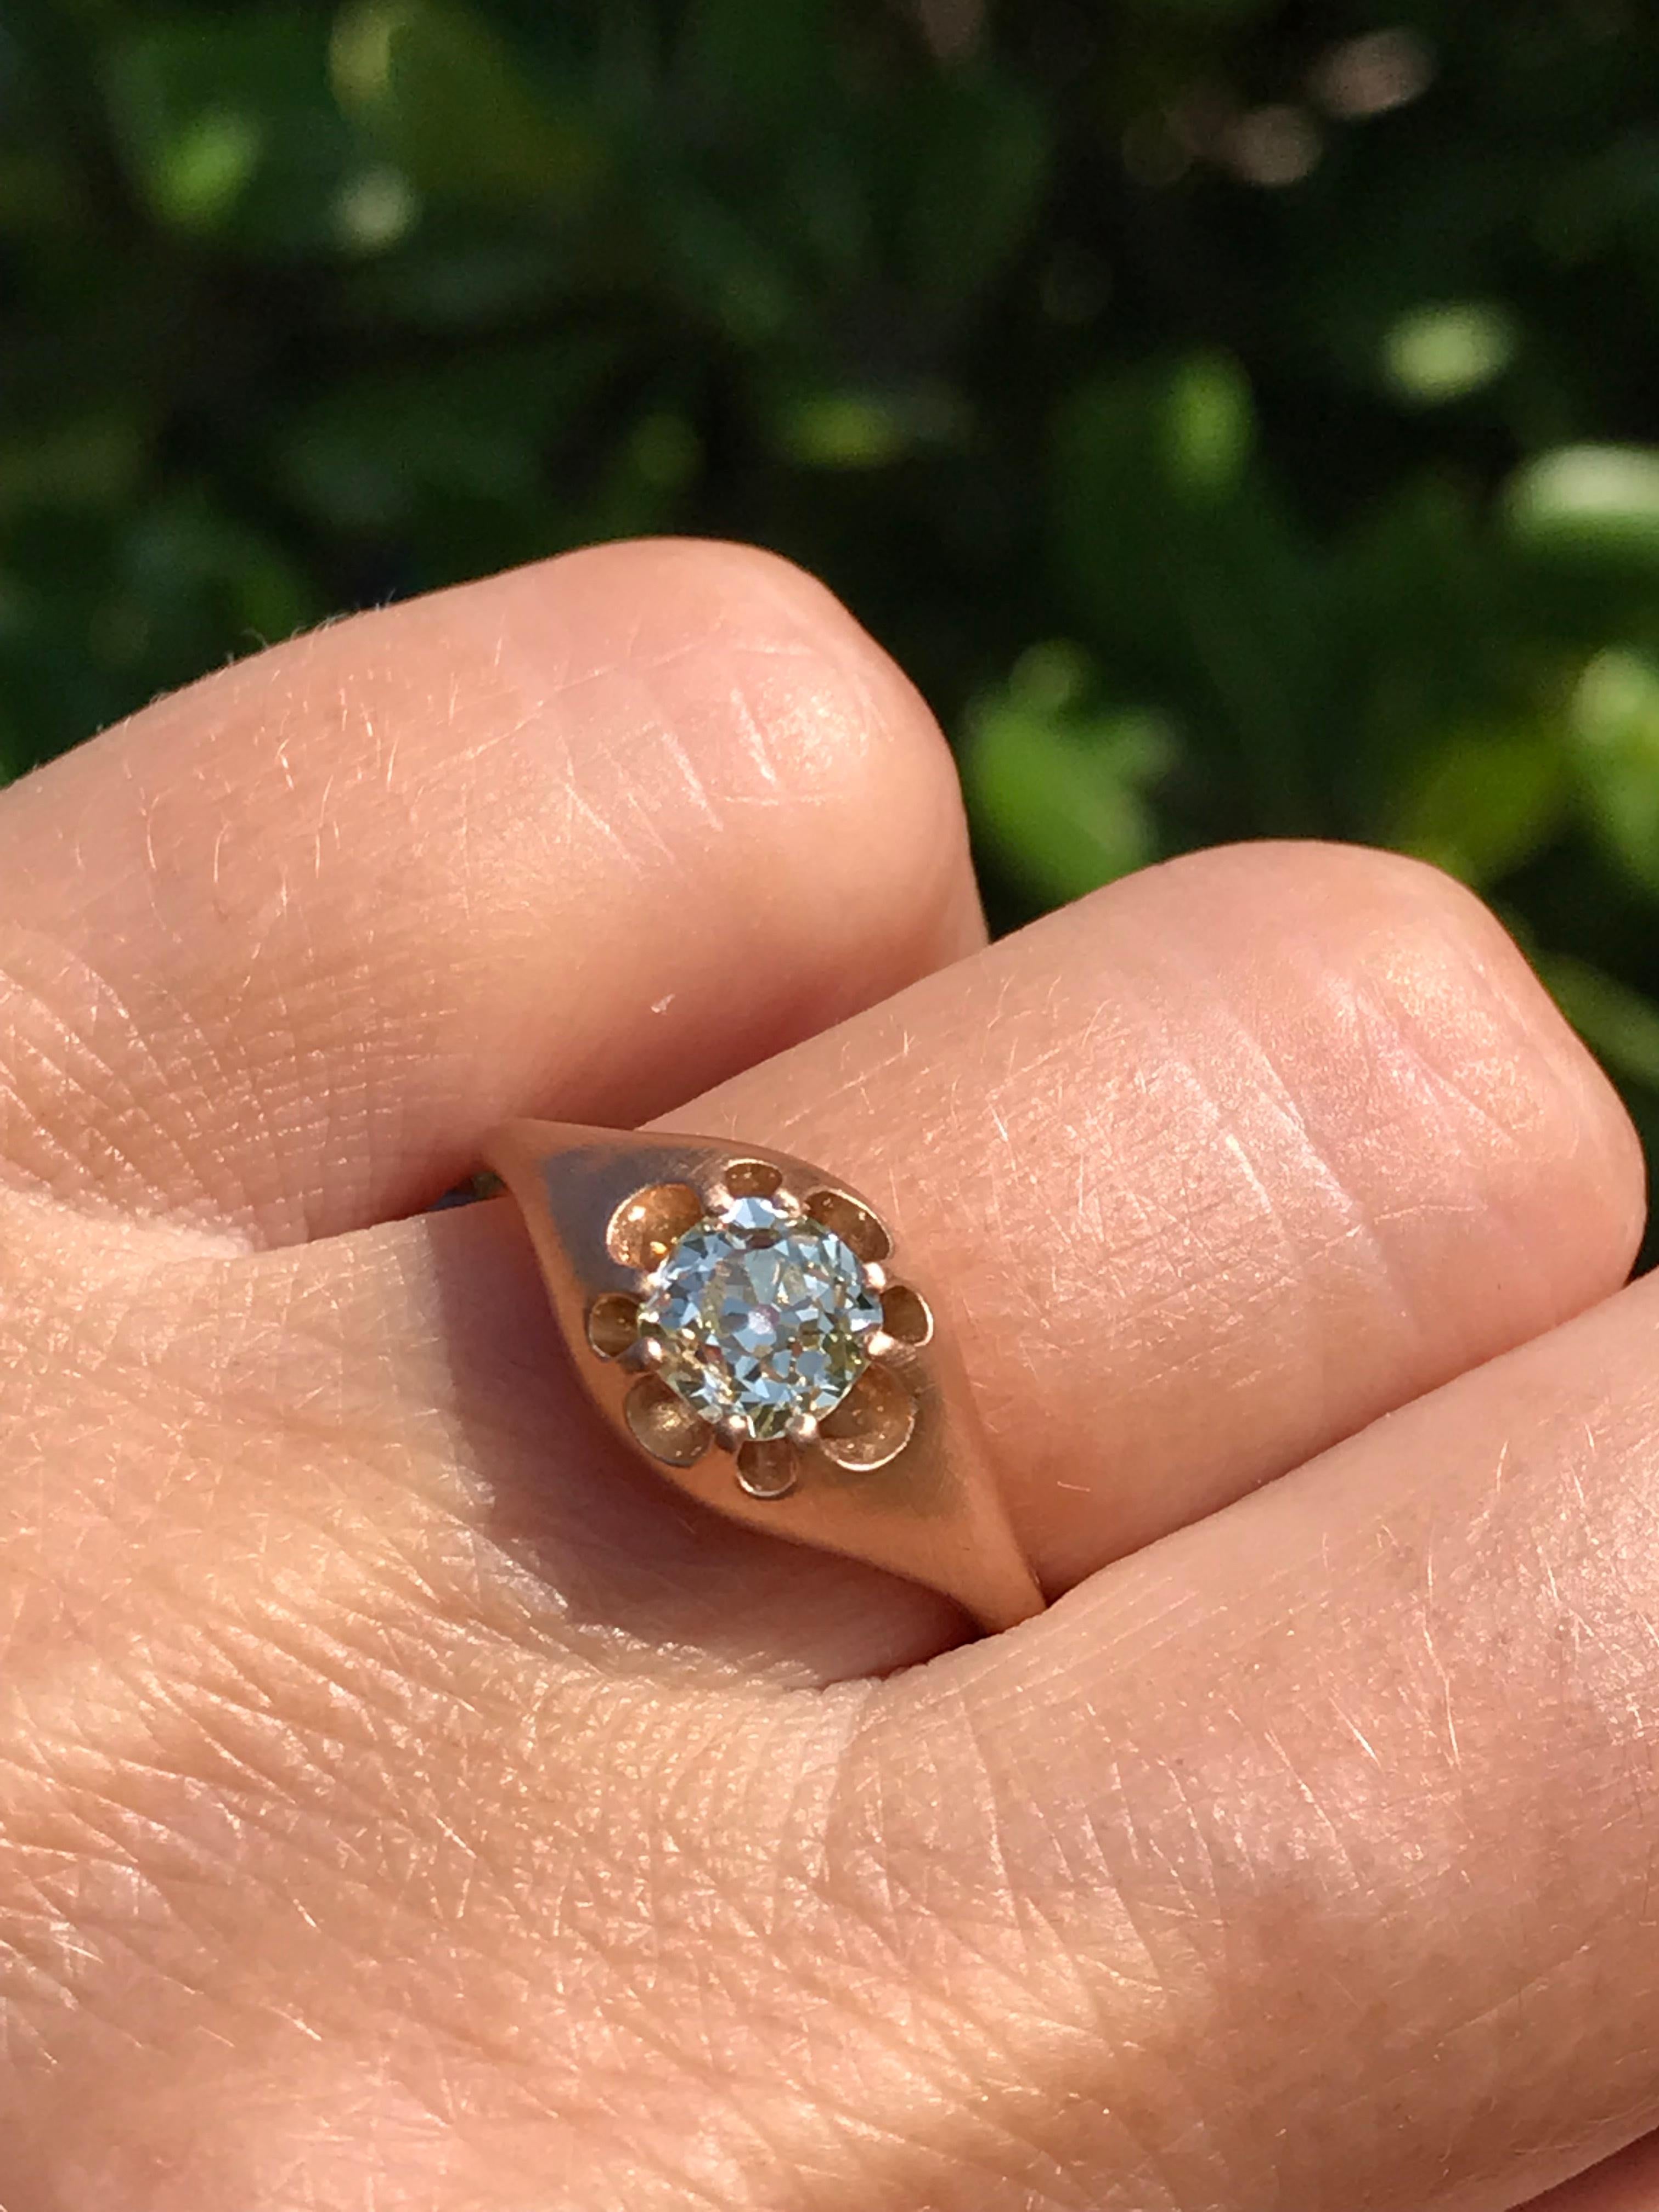 Dalben design One of a kind 18 kt rose  gold ring with a cushion cut old mine cut diamond weight 0,82 carats  .
Ring size  US 6    -  EU 52 re-sizable .  
Bezel setting dimension:  
max width 10 mm,  
max height 8,5 mm. 
The ring has been designed